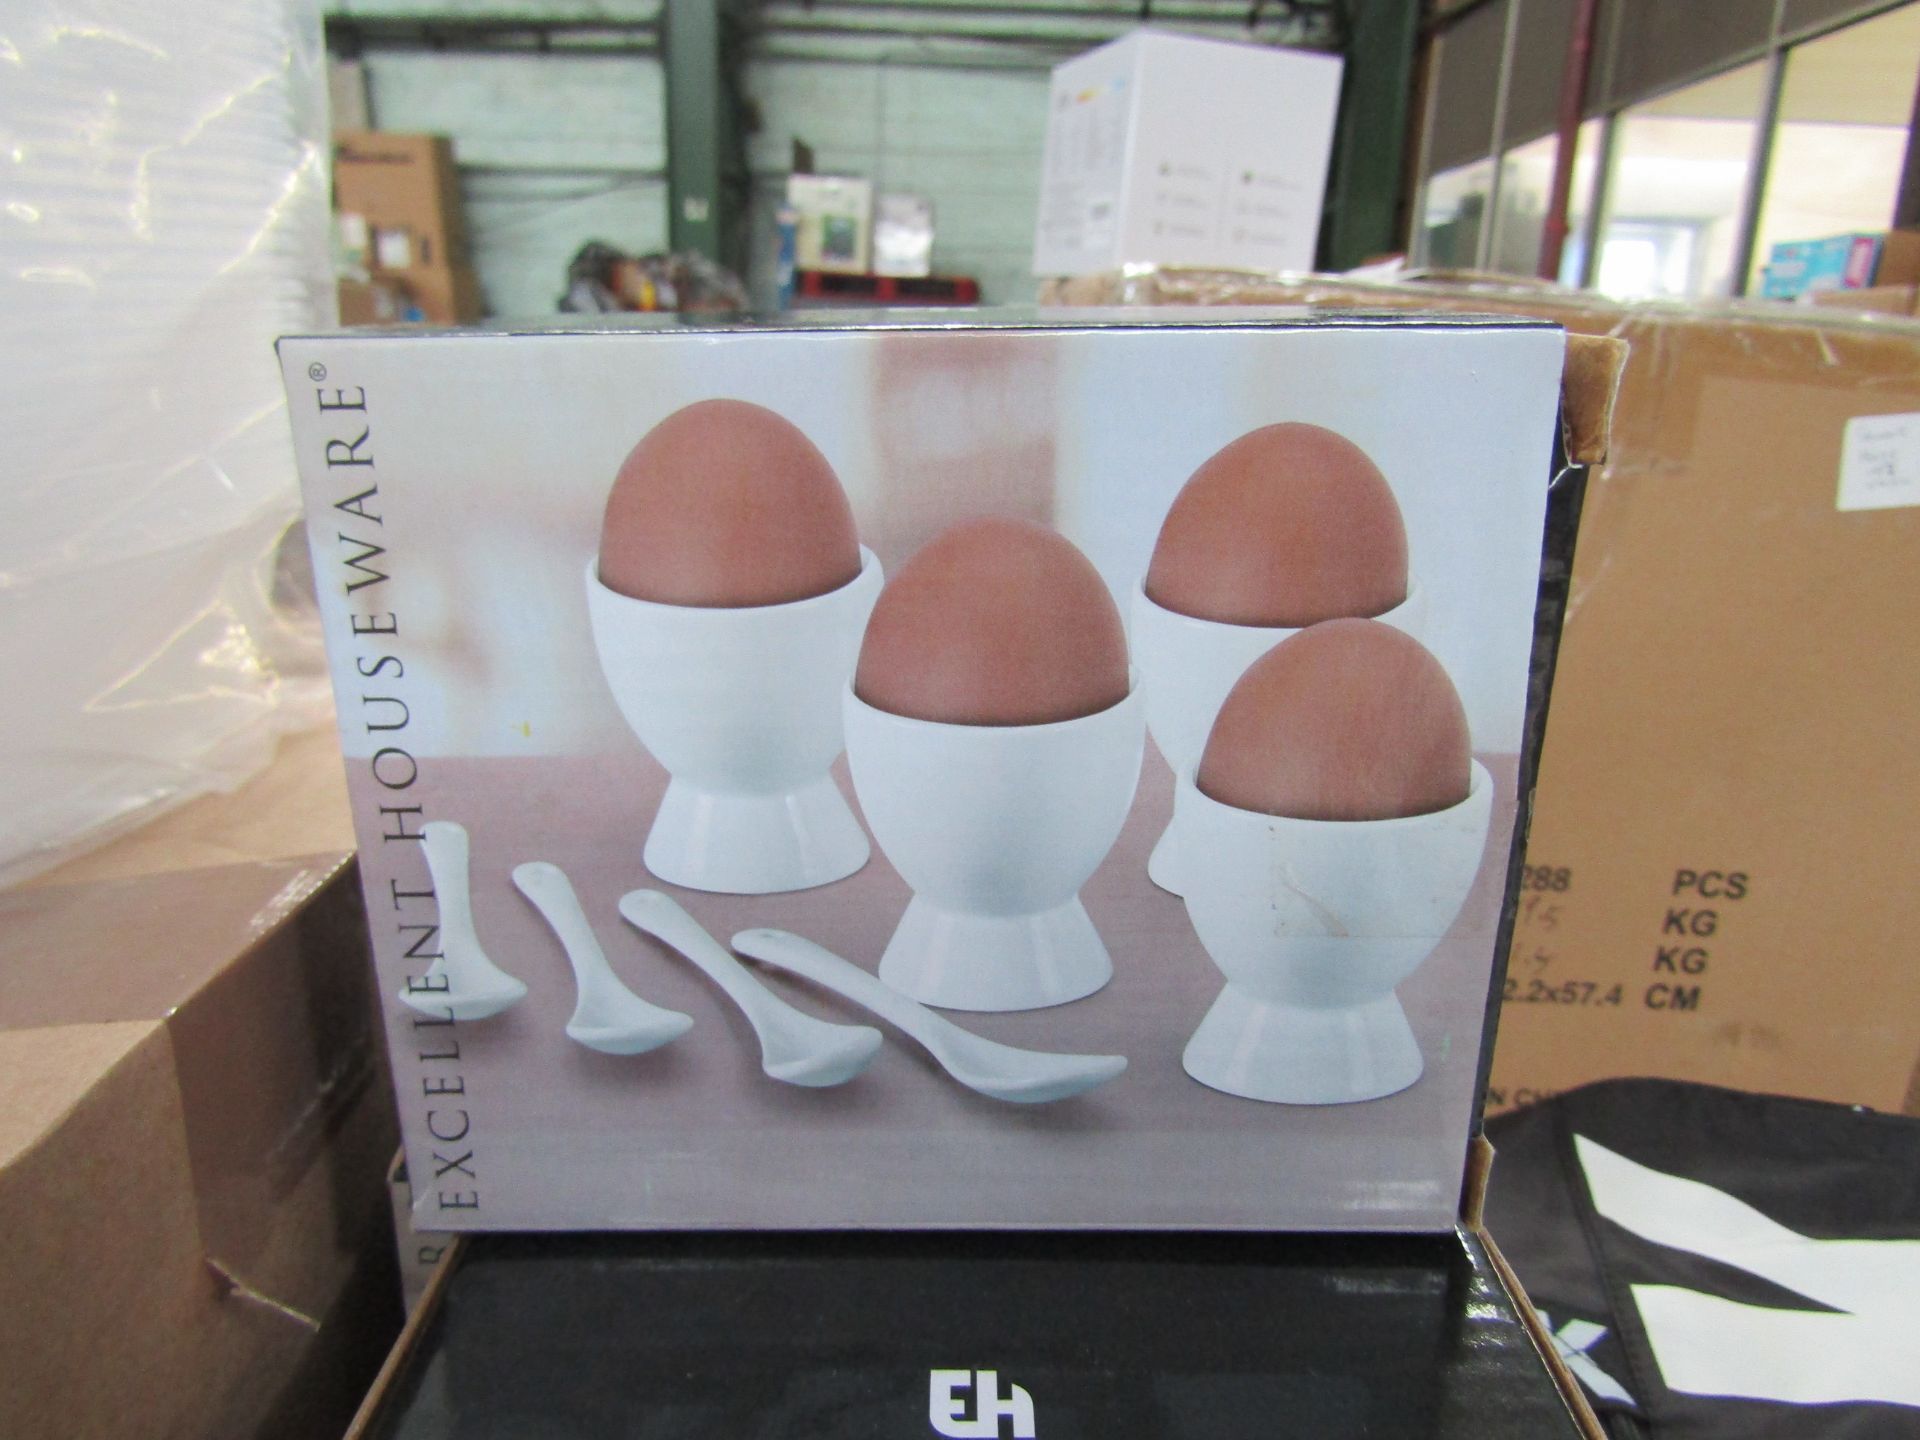 2x Sets of 4 egg cups and spoon sets, unchecked but look unused